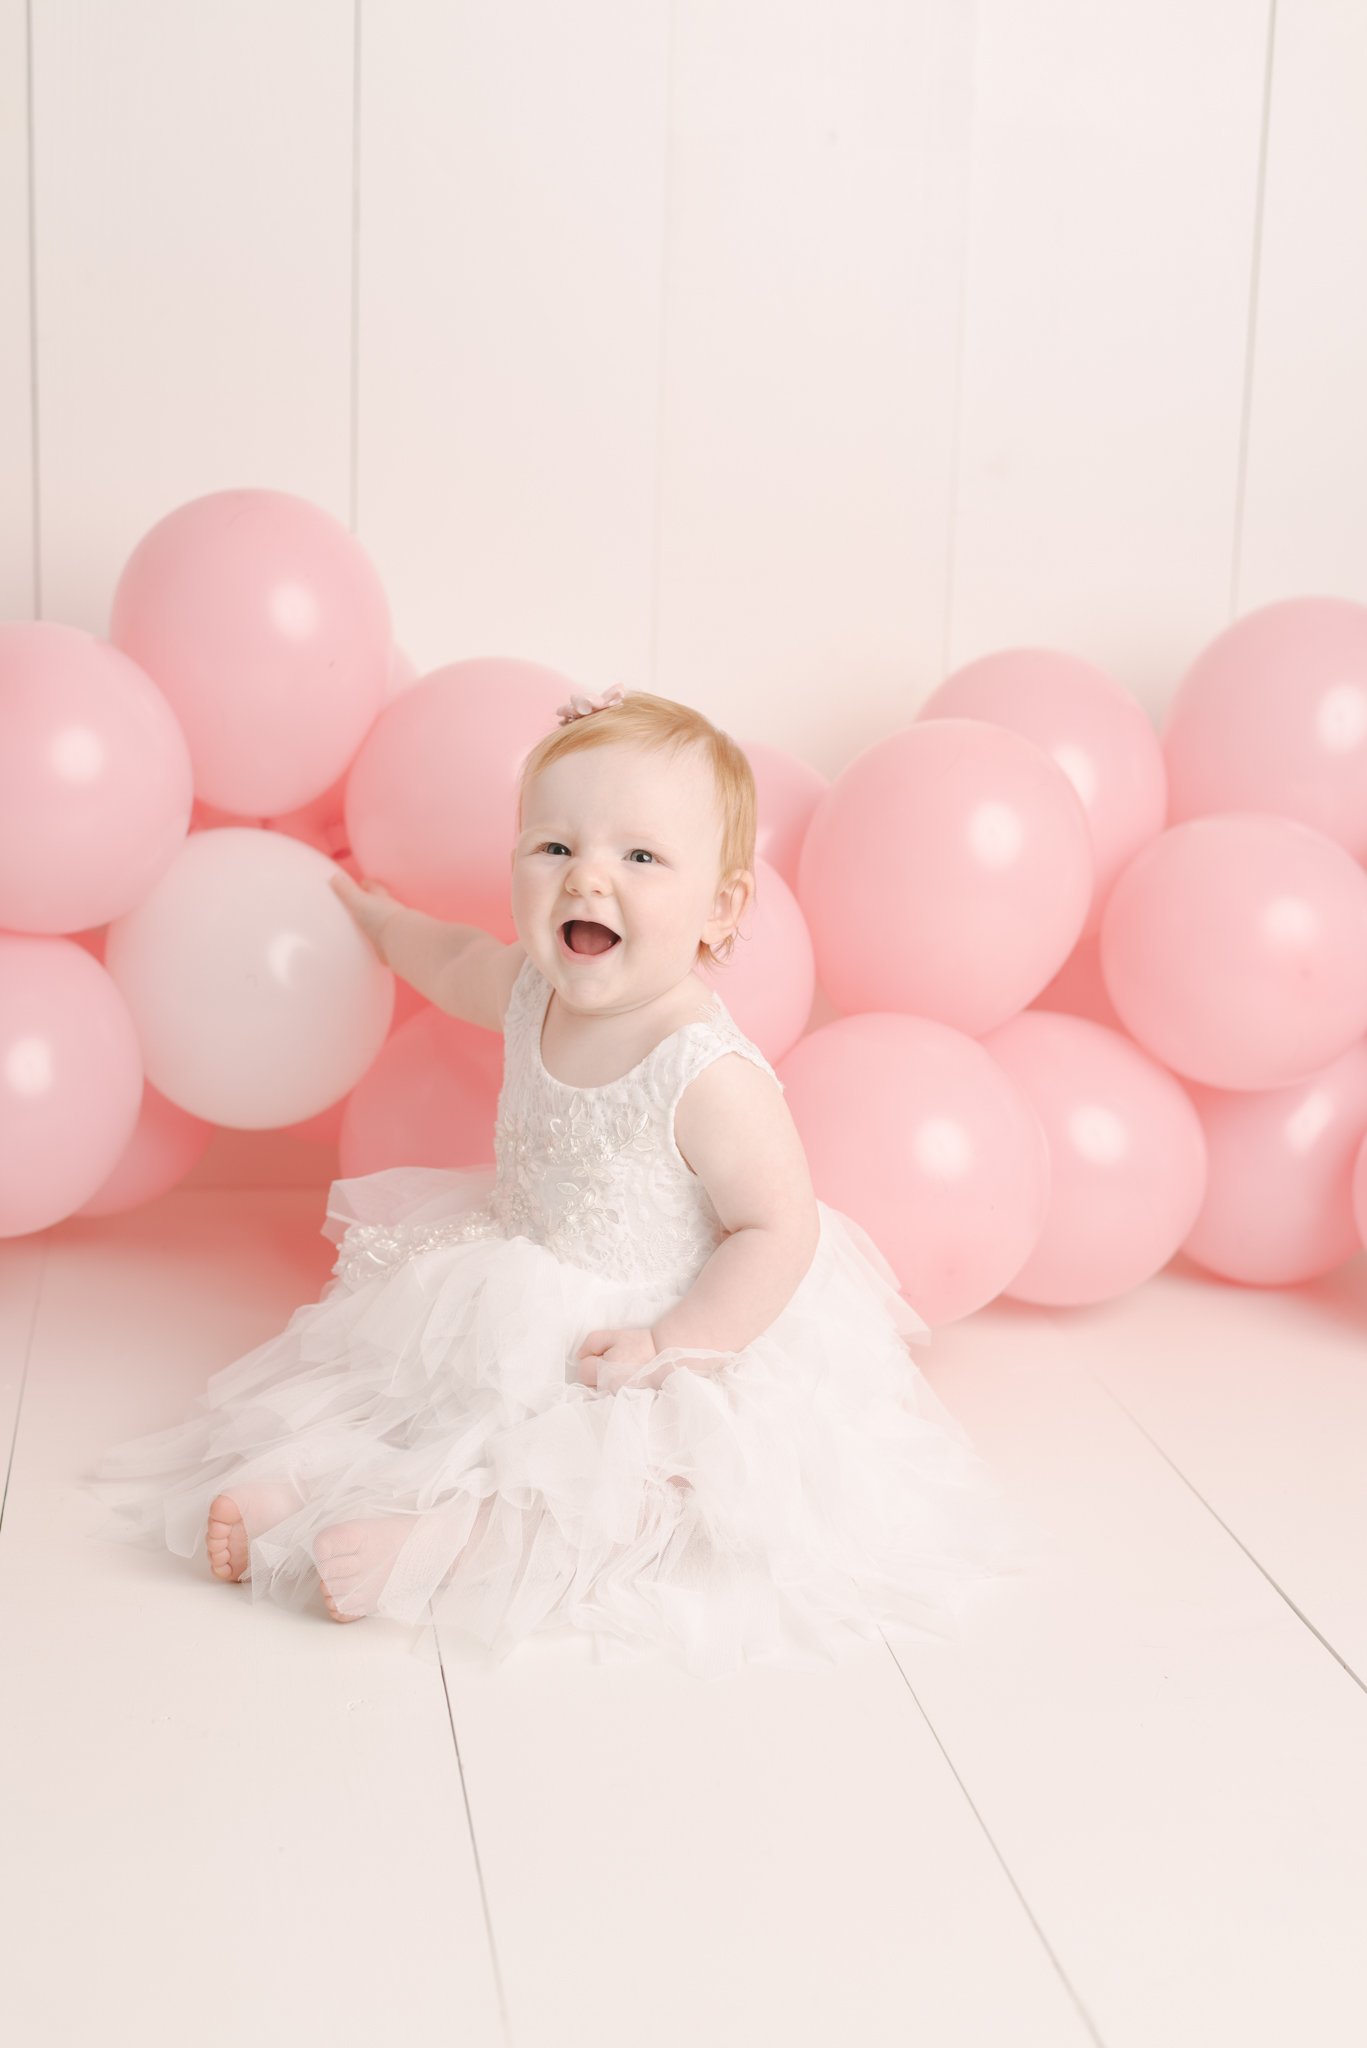 Simple_Pink_Pearls_Frist_Birthday_Girl_Smash_and_Splash_Session_Cake_Studio_by_Erika_Child_and_Family_Photographer_for_Christie_Leigh_Photo_in_cortland_OH_Ohio_Trumbull_County_002.jpg